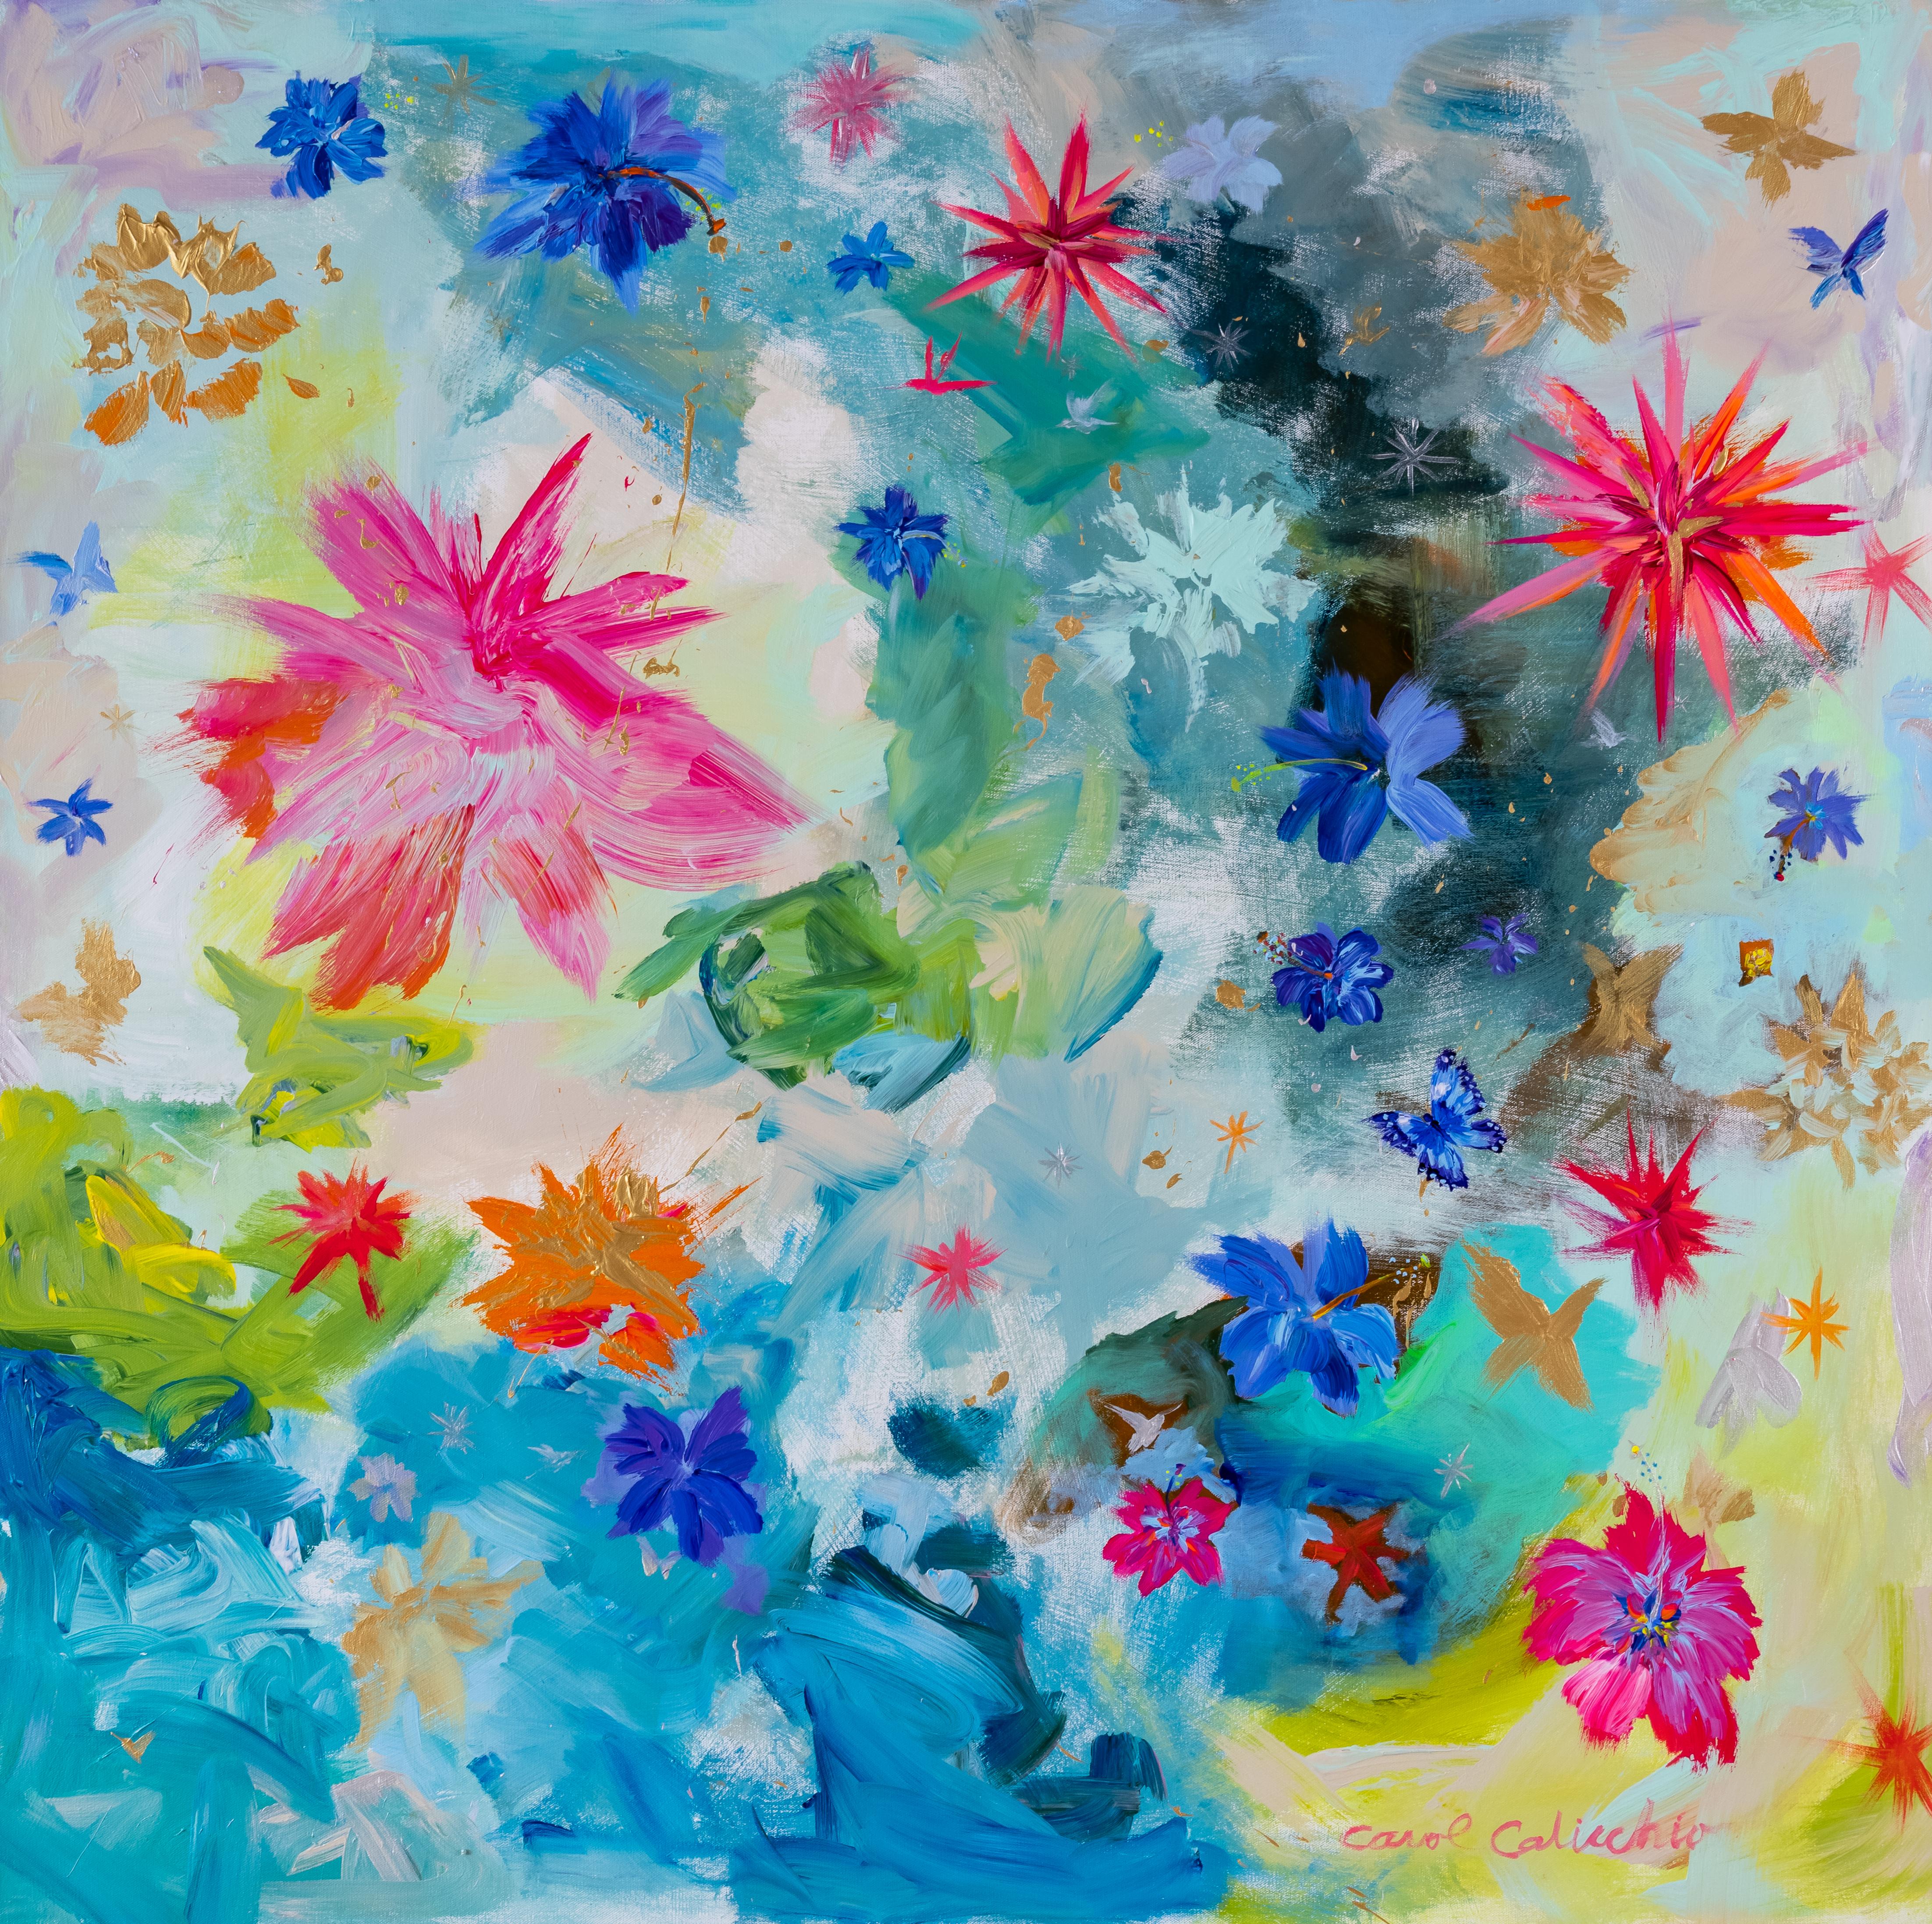 Carol Calicchio Abstract Painting - Cosmic Flowers